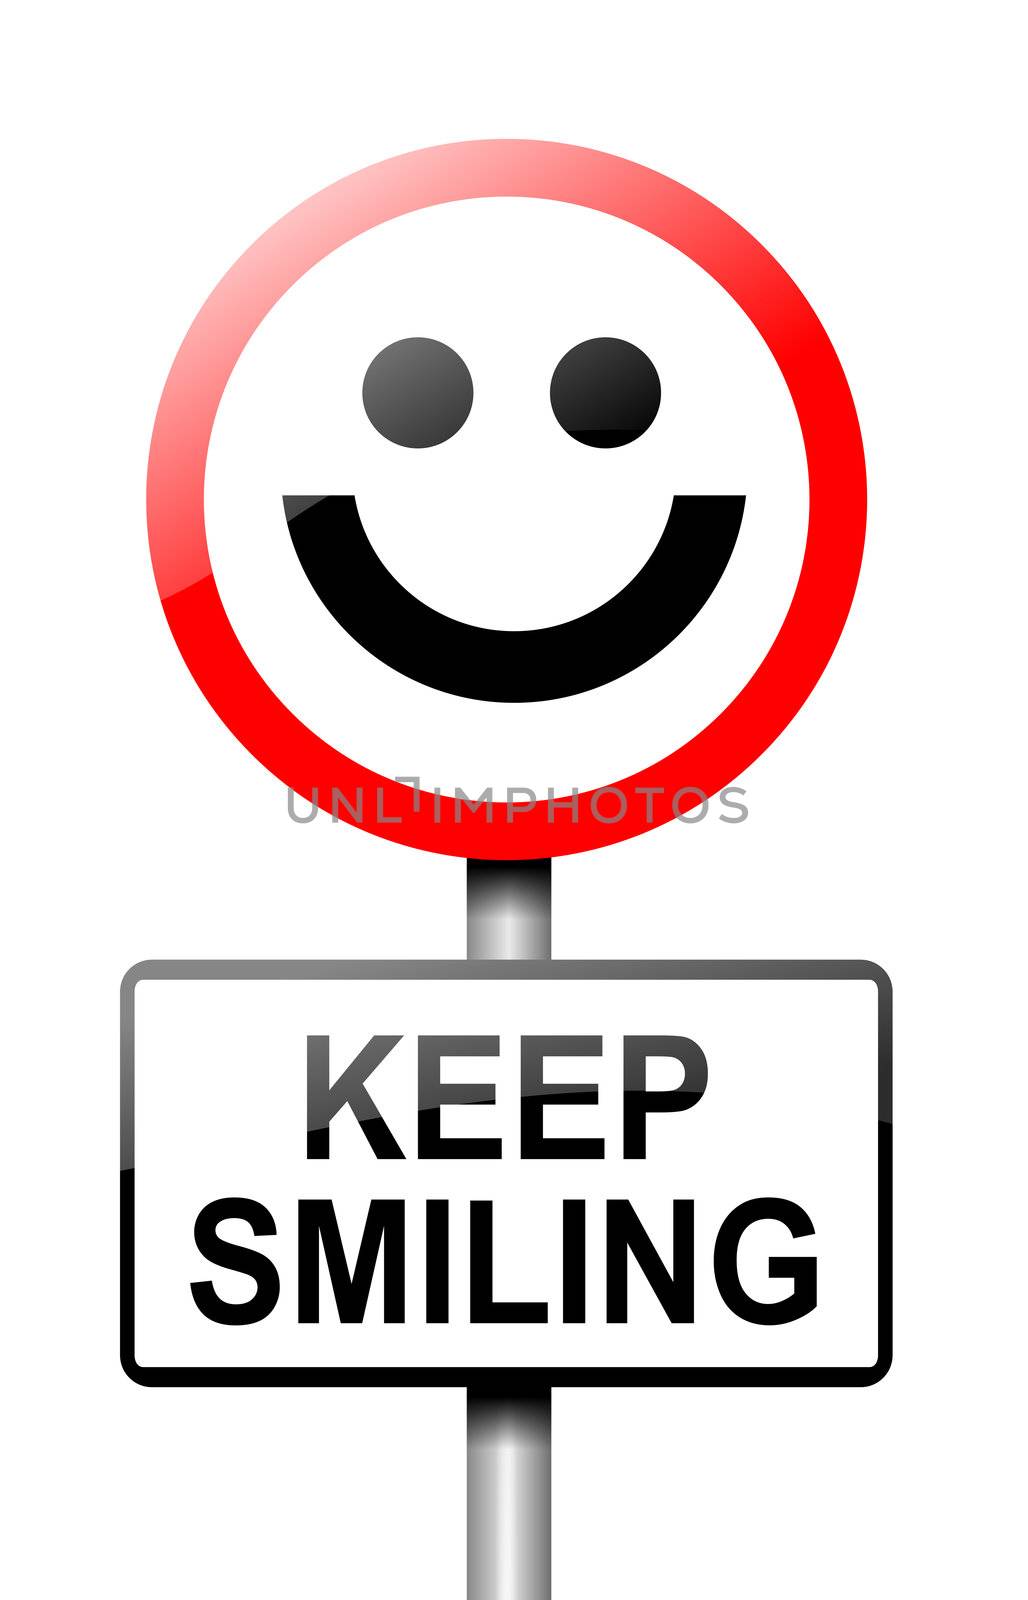 Illustration depicting a road traffic sign with a keep smiling concept. White background.